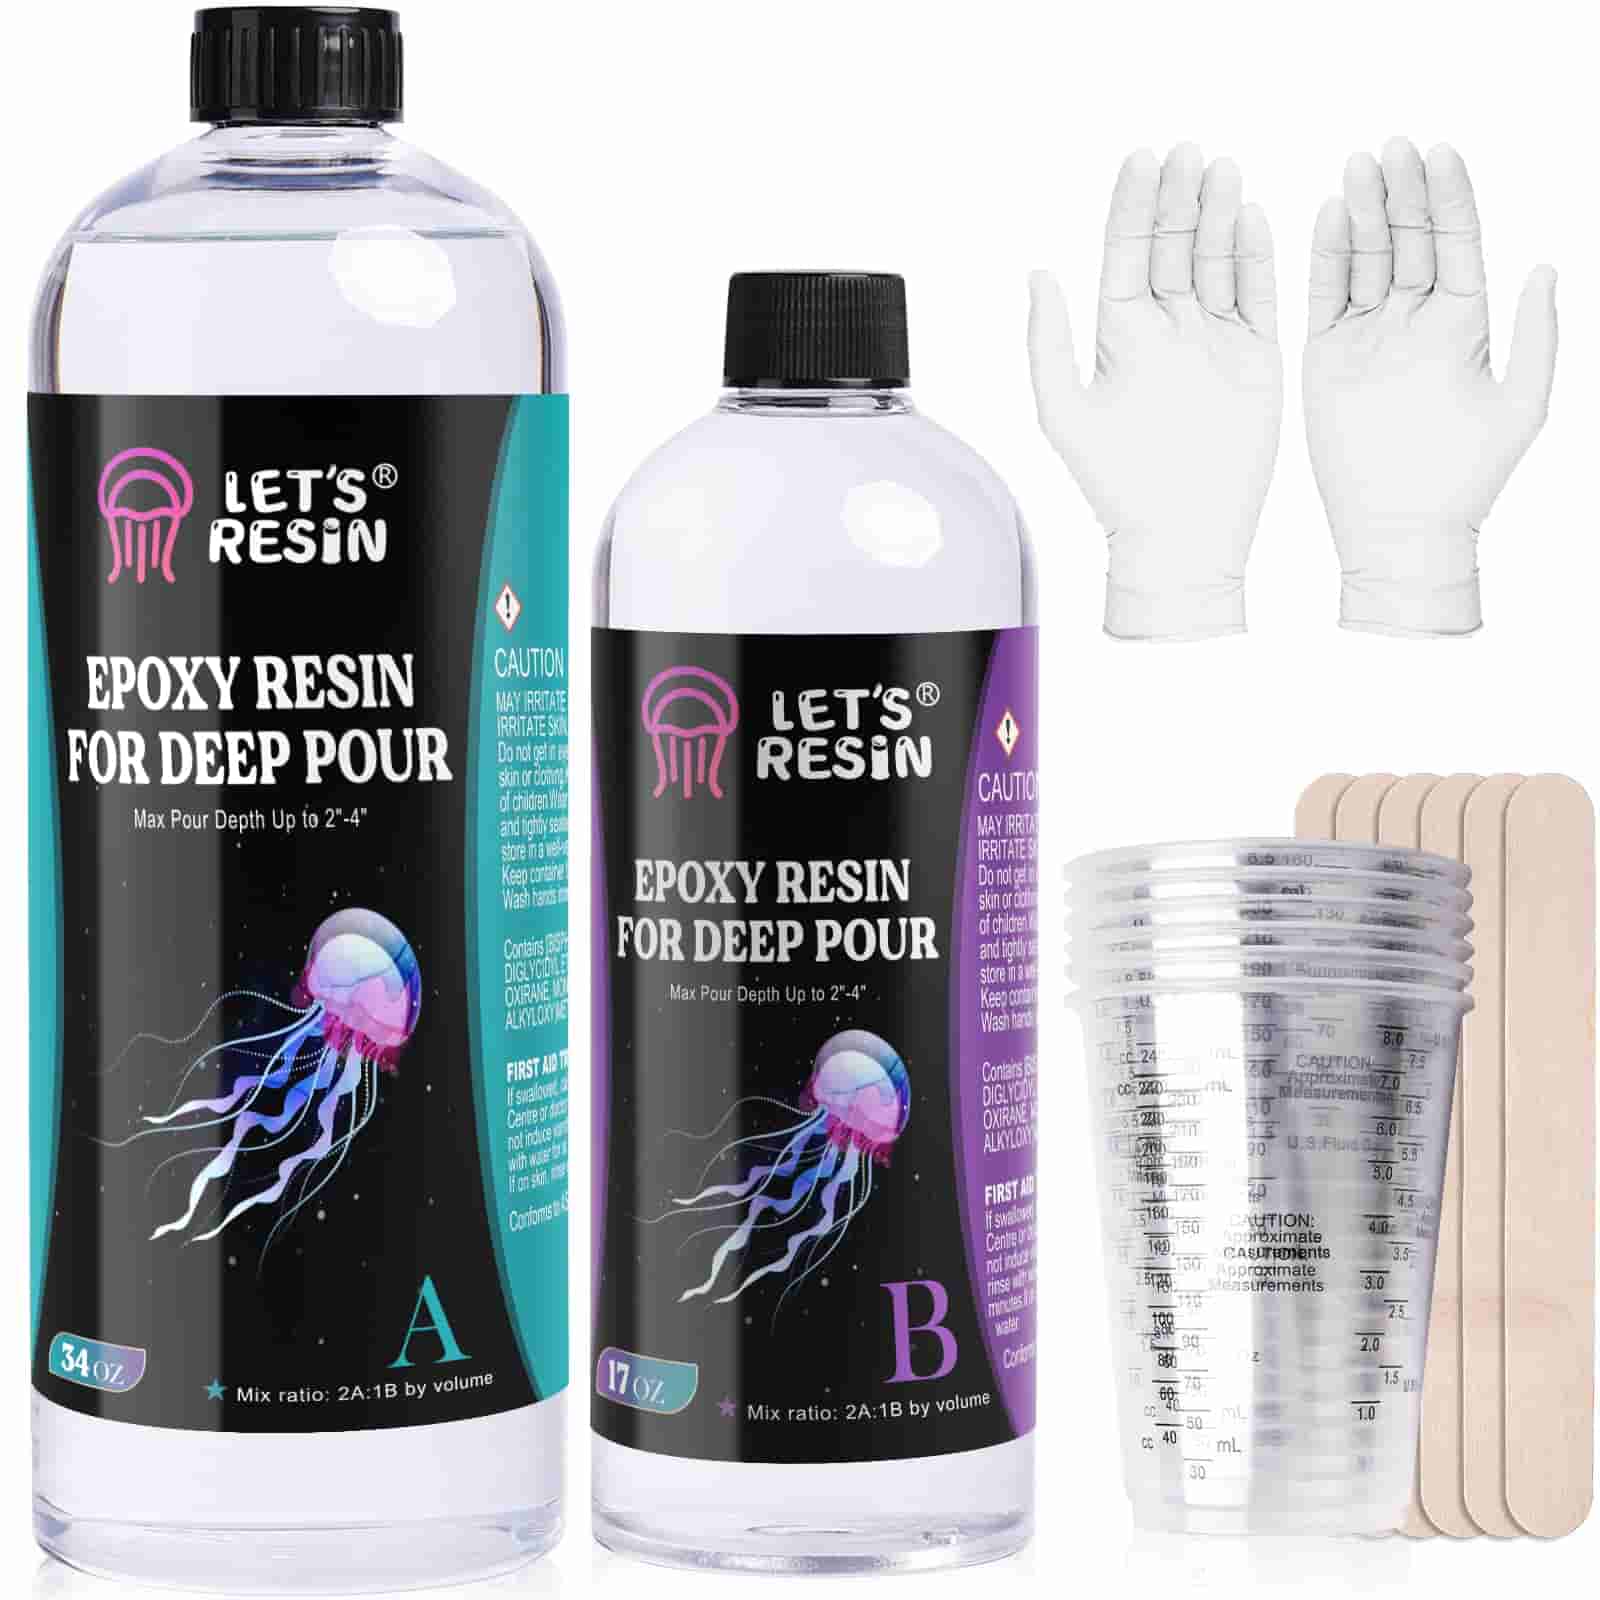 Let's Resin 51oz Deep Pour Epoxy Resin Kit, 2-4 Inch,Bubble Free &Crystal Clear Liquid Glass Casting Resin for River Table,Wood Filler,Resin Art